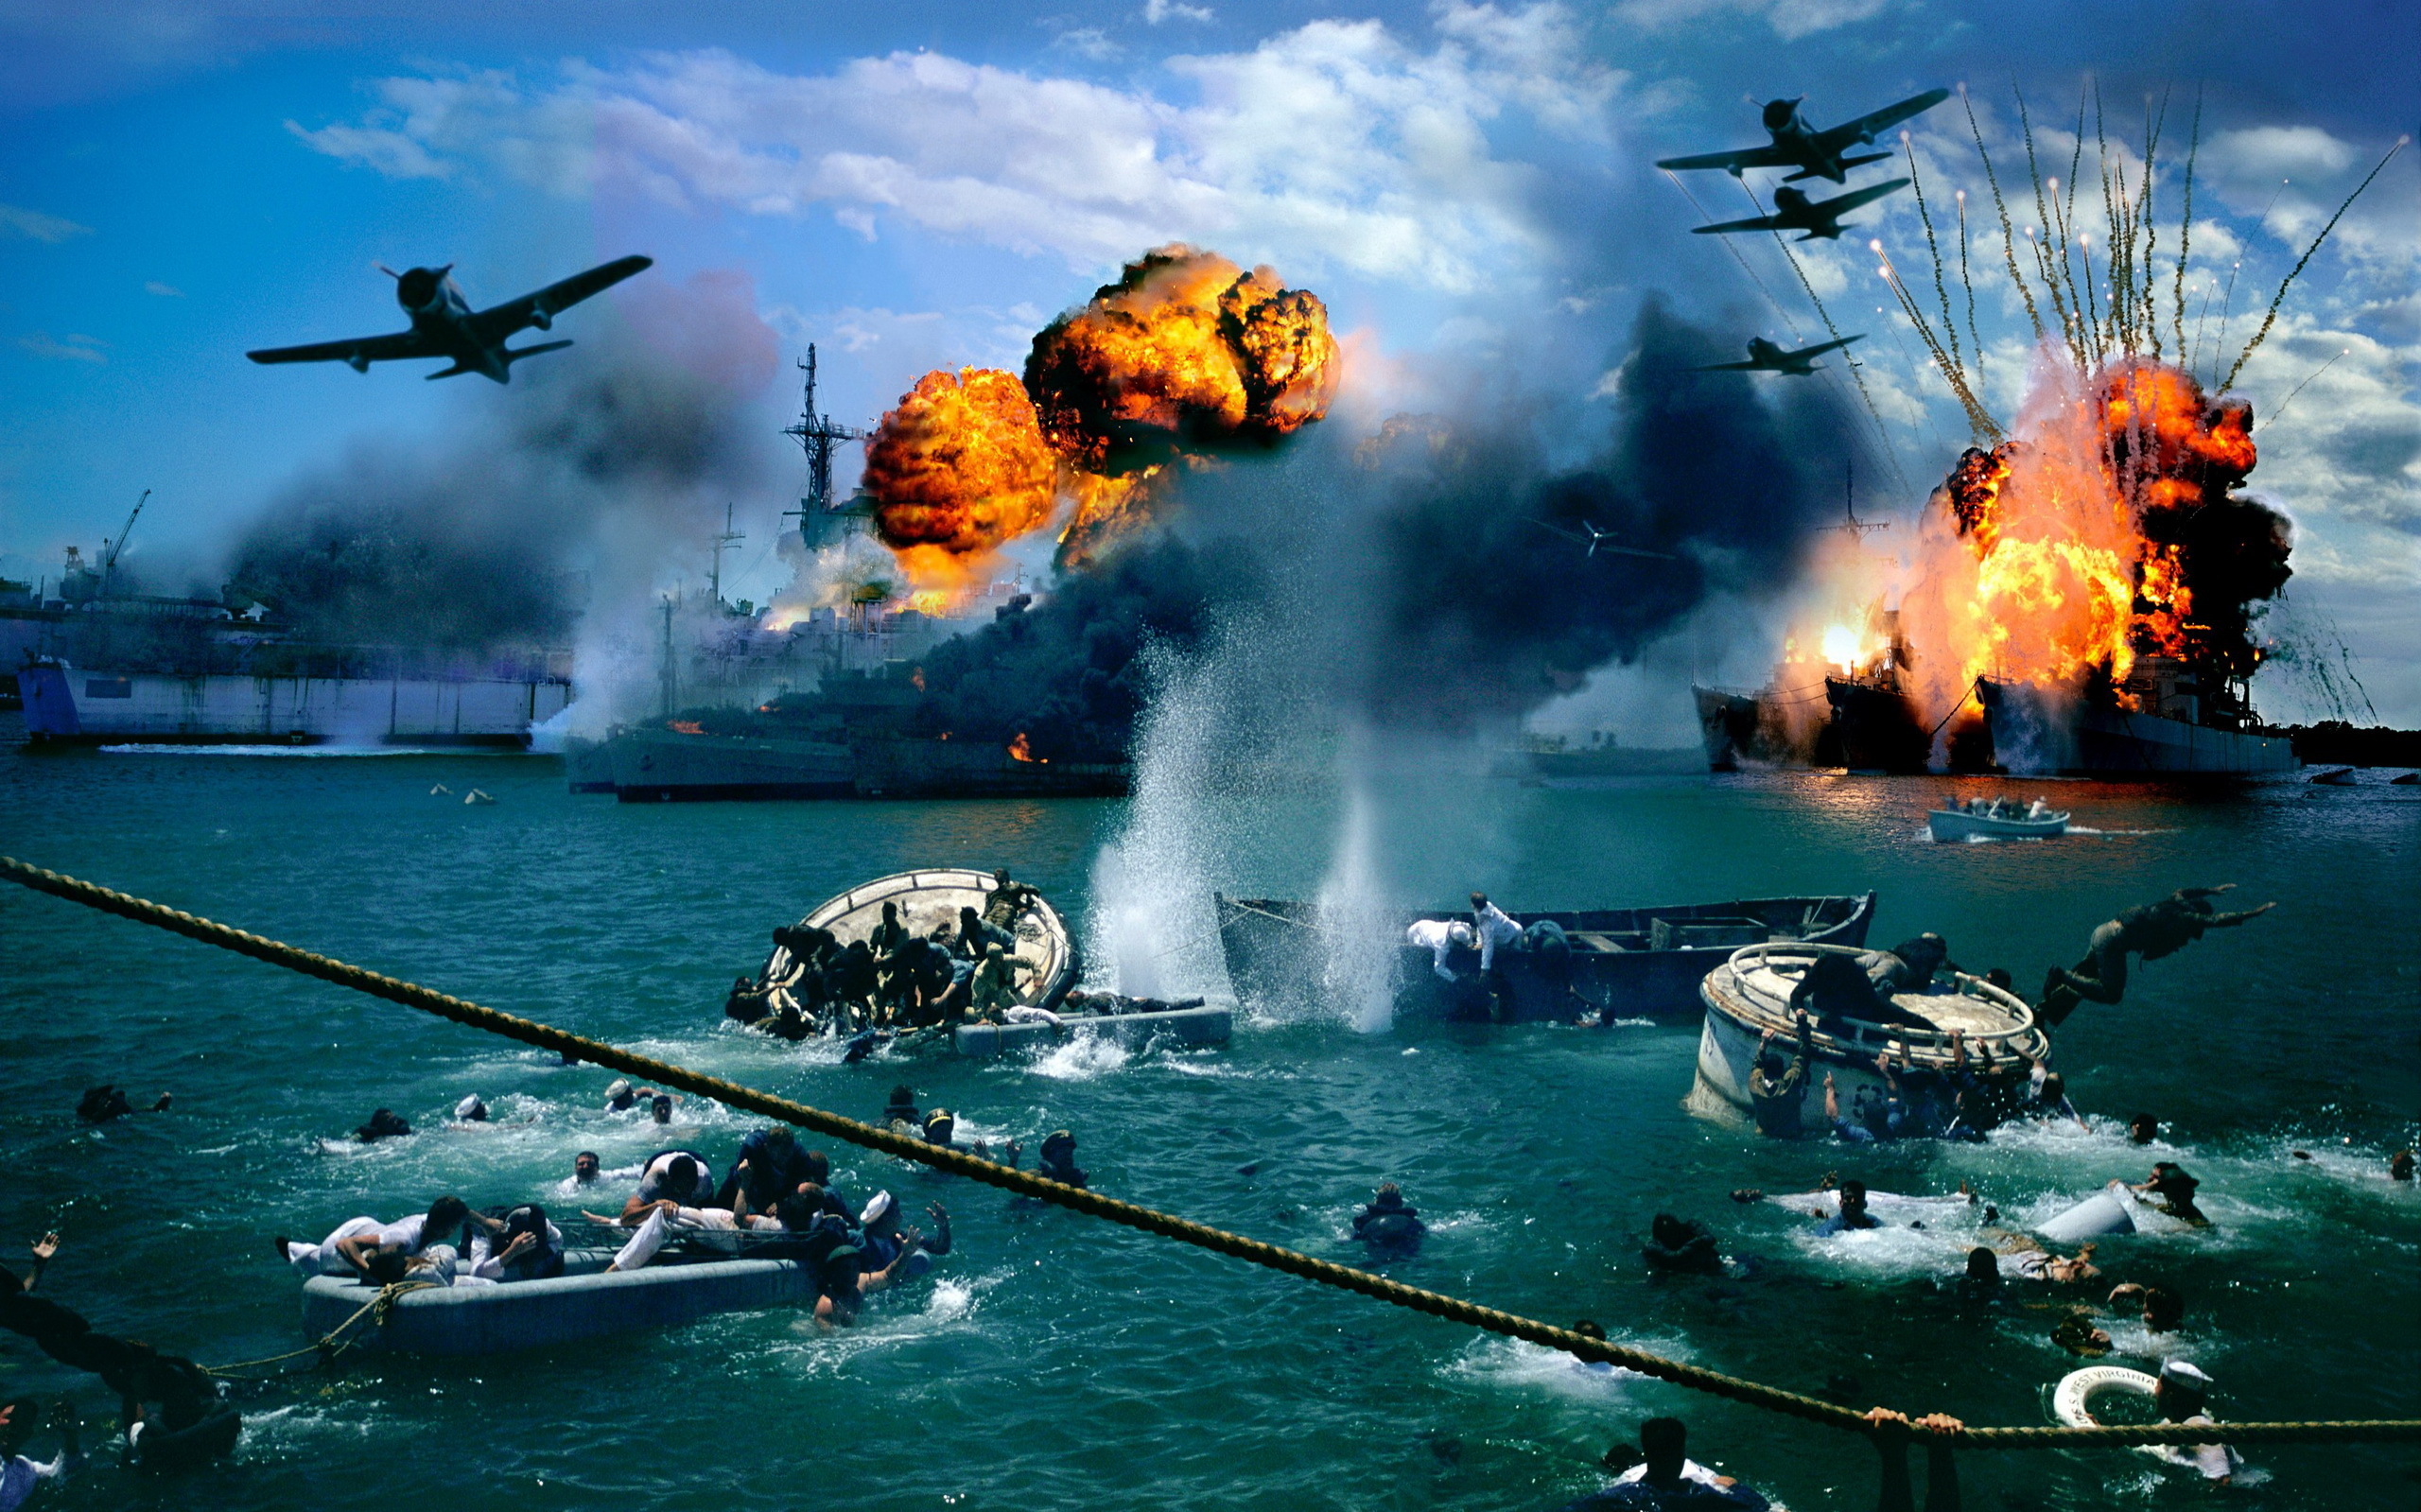 pearl harbor, Attack, Battles, Wars, Ww2, Wwll, Vehicles, Watercrafts, Ships, Boats, Oceansfire, Flames, Explosions, Airplanes, Aircrafts, Military, Cg, Digital art, Manipulations Wallpaper